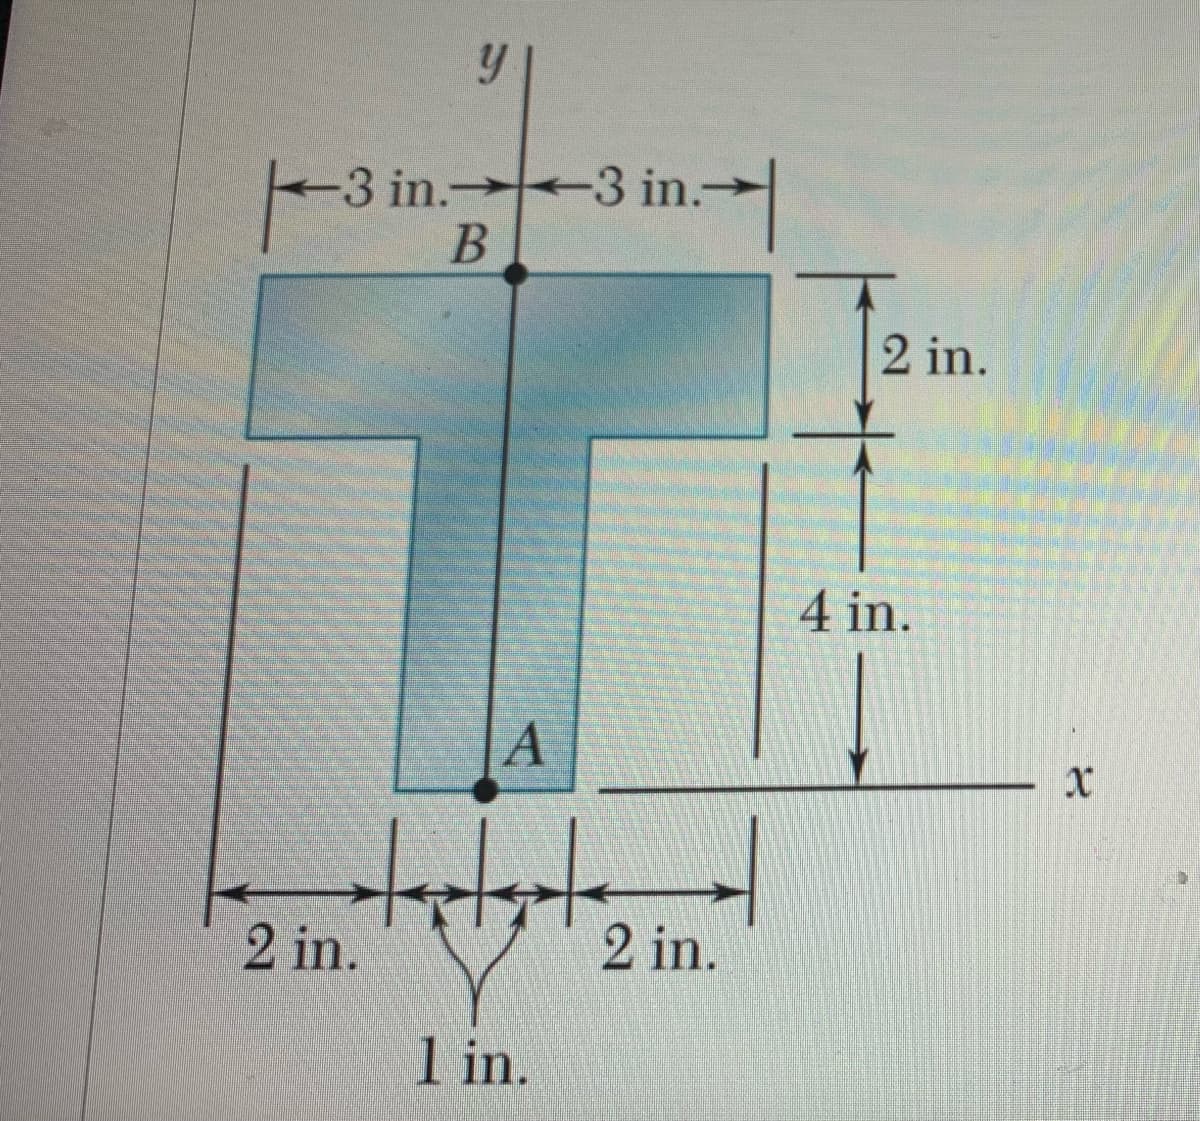 Welcome to our educational webpage! In this section, we discuss a fundamental mechanical engineering concept using a T-shaped diagram. Below is the detailed description and explanation of the diagram dimensions:

### Diagram Description (T-shaped Figure)

#### Vertical and Horizontal Axes
- **y-axis**: This axis runs vertically and intersects the horizontal x-axis at point A.
- **x-axis**: This axis runs horizontally and intersects the vertical y-axis at point A.

#### Key Points
- **Point A**: Intersection of the x and y axes at the bottom center of the vertical section.
- **Point B**: Located on the y-axis, 2 inches above Point A, at the intersection of the upper horizontal bar and the main vertical bar.

#### Dimensions
- **Horizontal Bar (Top of T)**
  - Width (Span): 6 inches (3 inches on either side from Point B)
  - Height: 2 inches
  
- **Vertical Bar (Stem of T)**
  - Overall Height: 6 inches (4 inches from Point A to the bottom of the horizontal bar + 2 inches for the horizontal bar itself)
  - Width: 2 inches aligned centrally with a 1-inch overlap on both sides at the bottom center.

#### Additional Measurements
- From the center of the vertical bar (Point A) at the bottom, there are two horizontal distances:
  - **Left**: 2 inches from the center to the left edge.
  - **Right**: 2 inches from the center to the right edge.
- The vertical bar extends 4 inches upwards from Point A to the start of the horizontal bar.
- On the bottom, there's an additional break in the horizontal width designated as 1 inch wide, which is balanced equally on both side edges.

This T-shaped figure is essential for engineering applications to understand material properties, structural balance, and stresses in a cross-section. Understanding these dimensions will aid in precise design and analysis tasks.